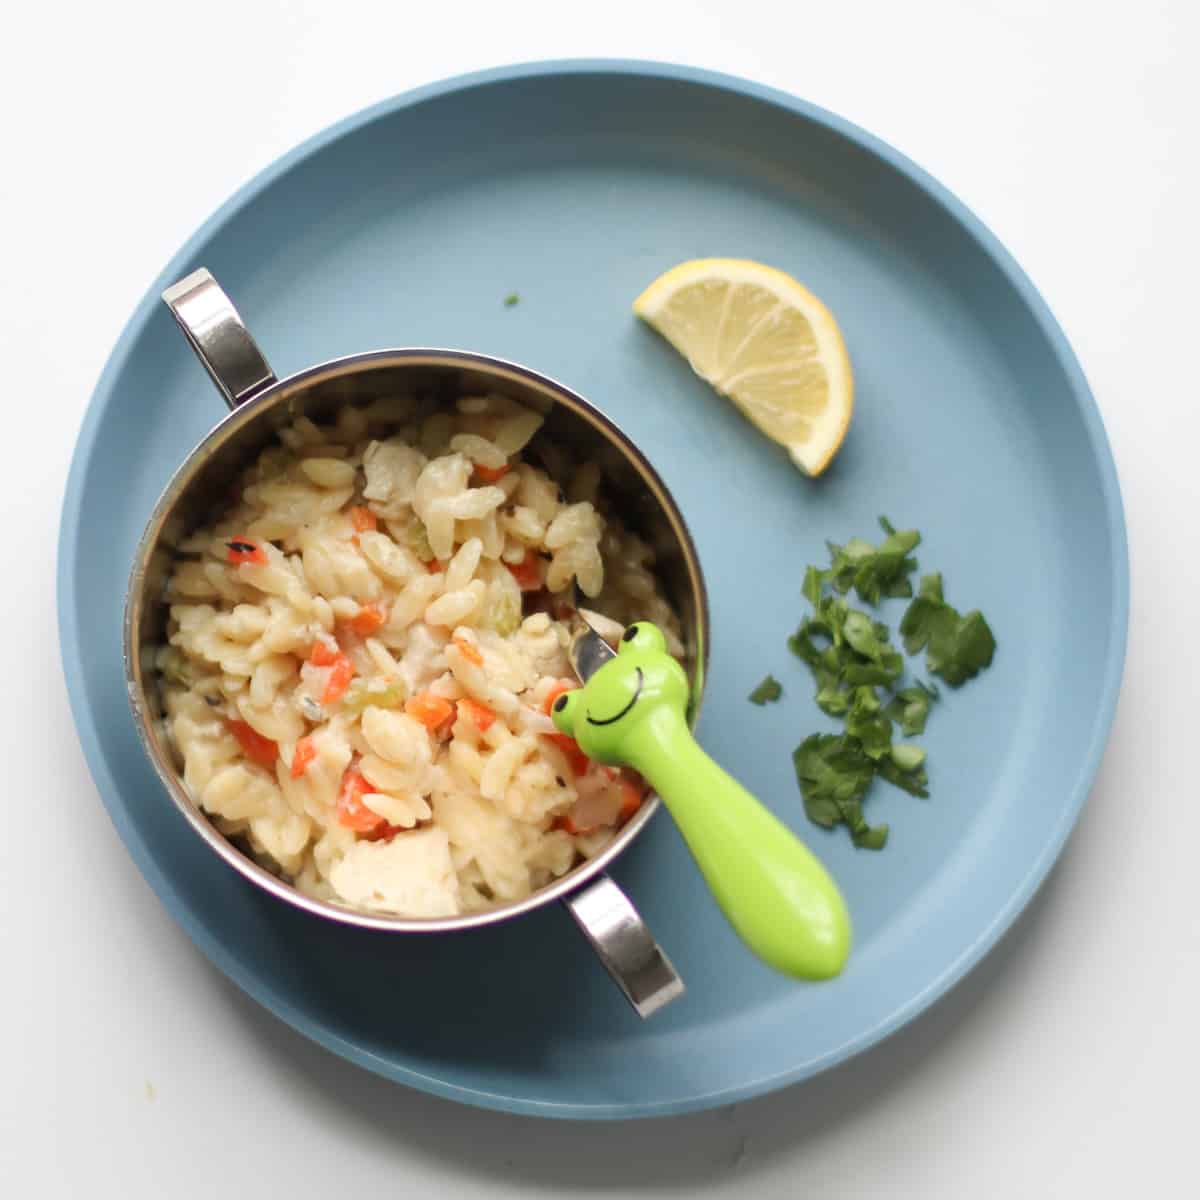 Toddler's plate with a small portion of orzo in a bowl, chopped parsley and lemon slice.